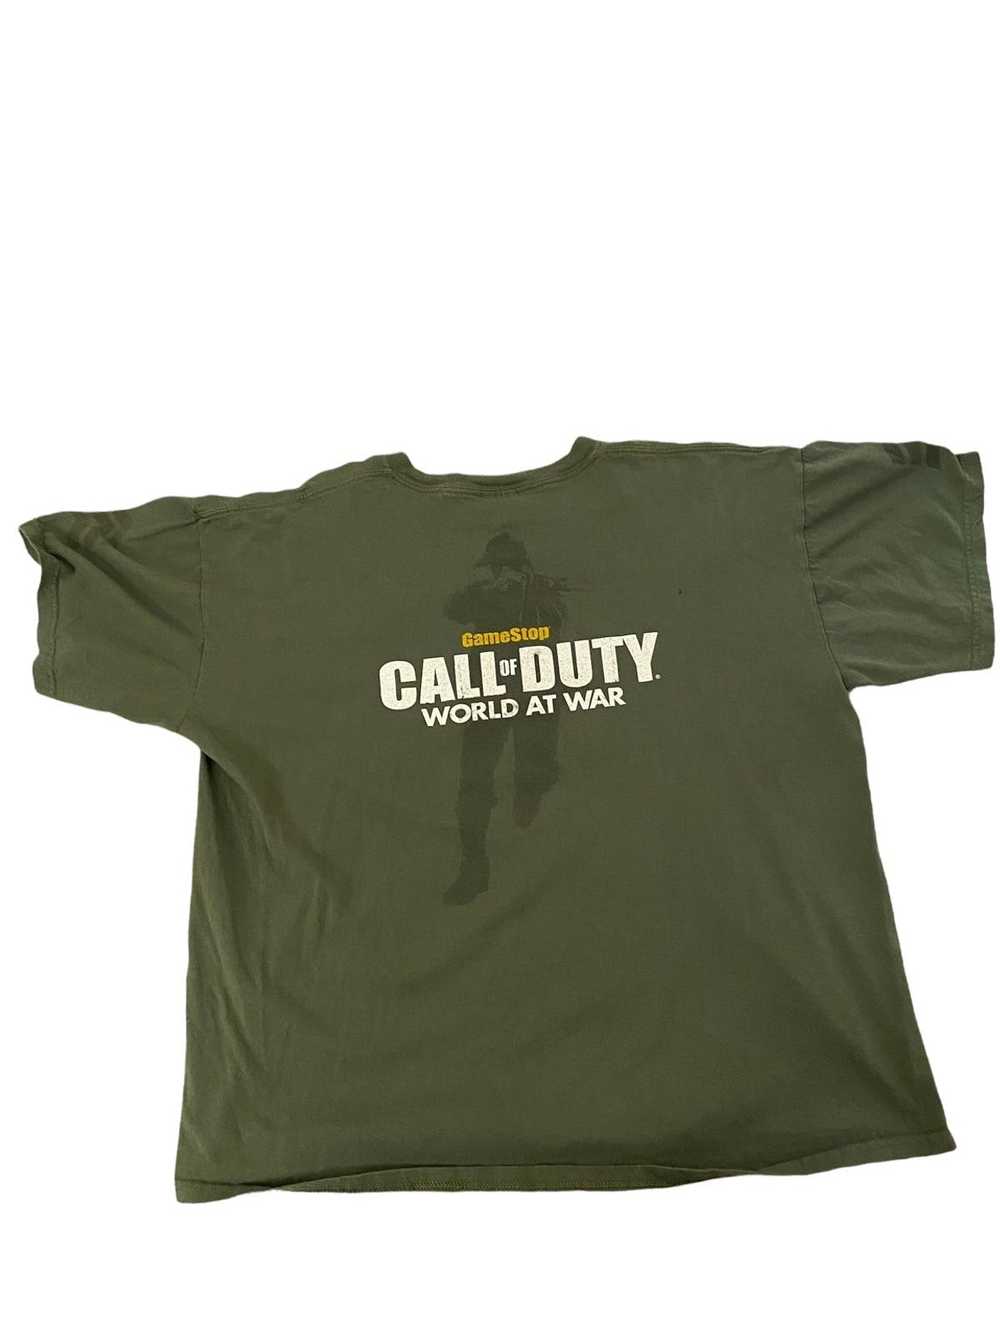 Vintage Call of Duty Video Game Shirt - image 2